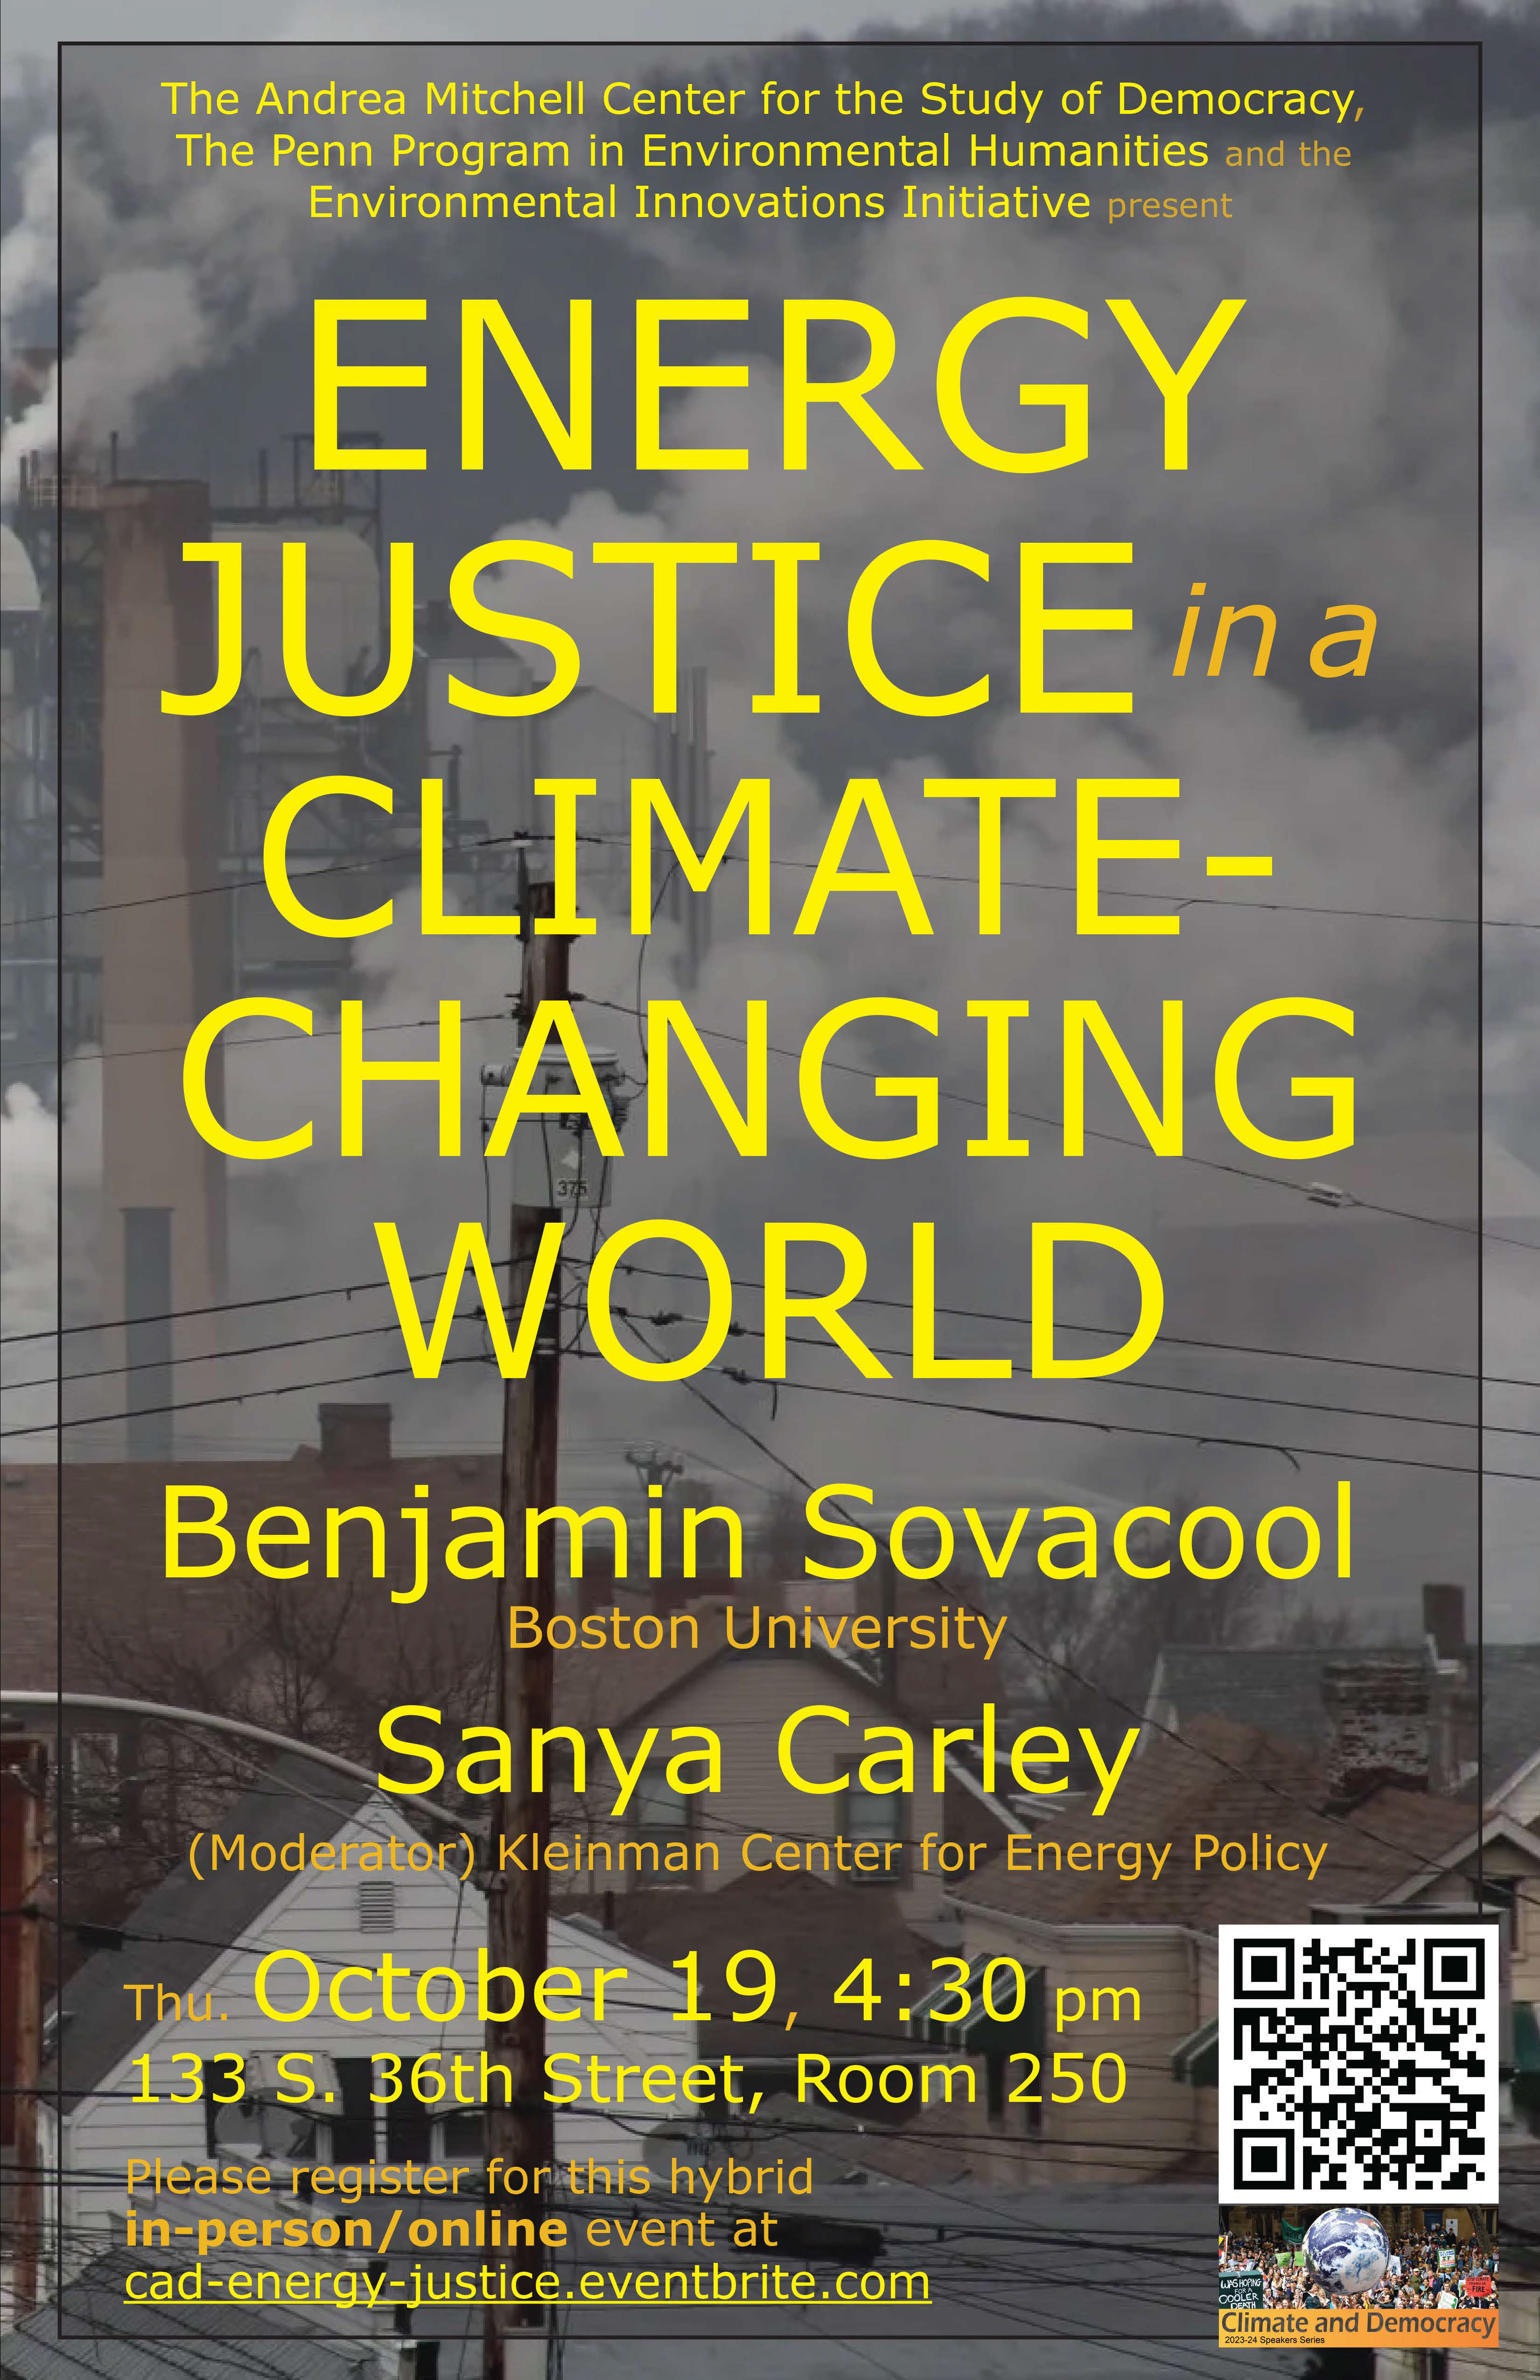 "Energy Justice in a Climate-Changing World" event flyer.